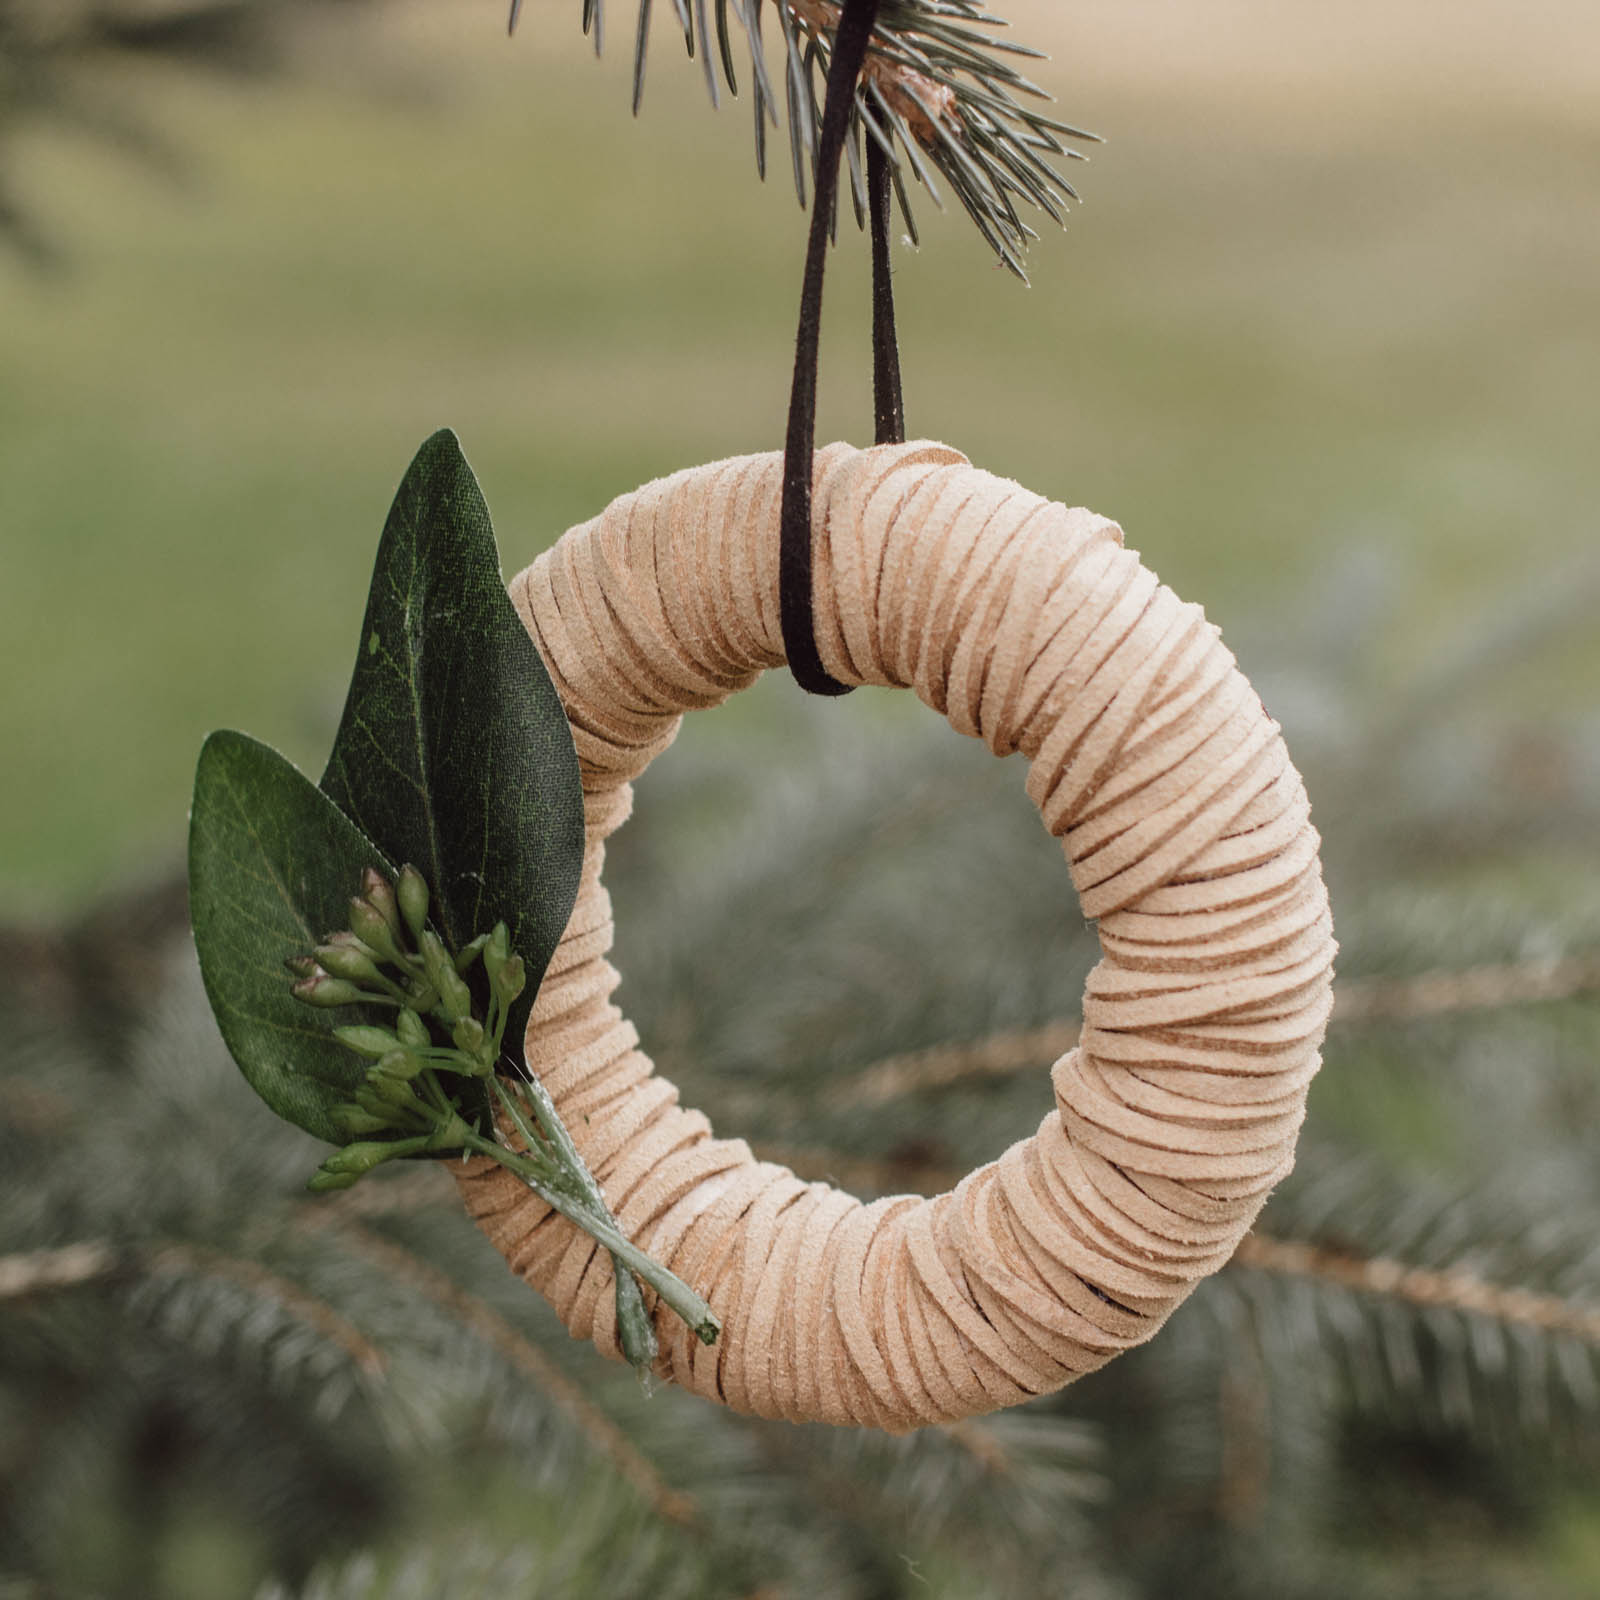 Beautiful mini wreath ornaments! These stylish leather ornaments are the perfect holiday accessory! Decorate your tree with this simple DIY Christmas craft! Perfect for modern, farmhouse, traditional, or any decor style! #Christmascraft #christmas #modernChristmas #holidaydecor #wreath